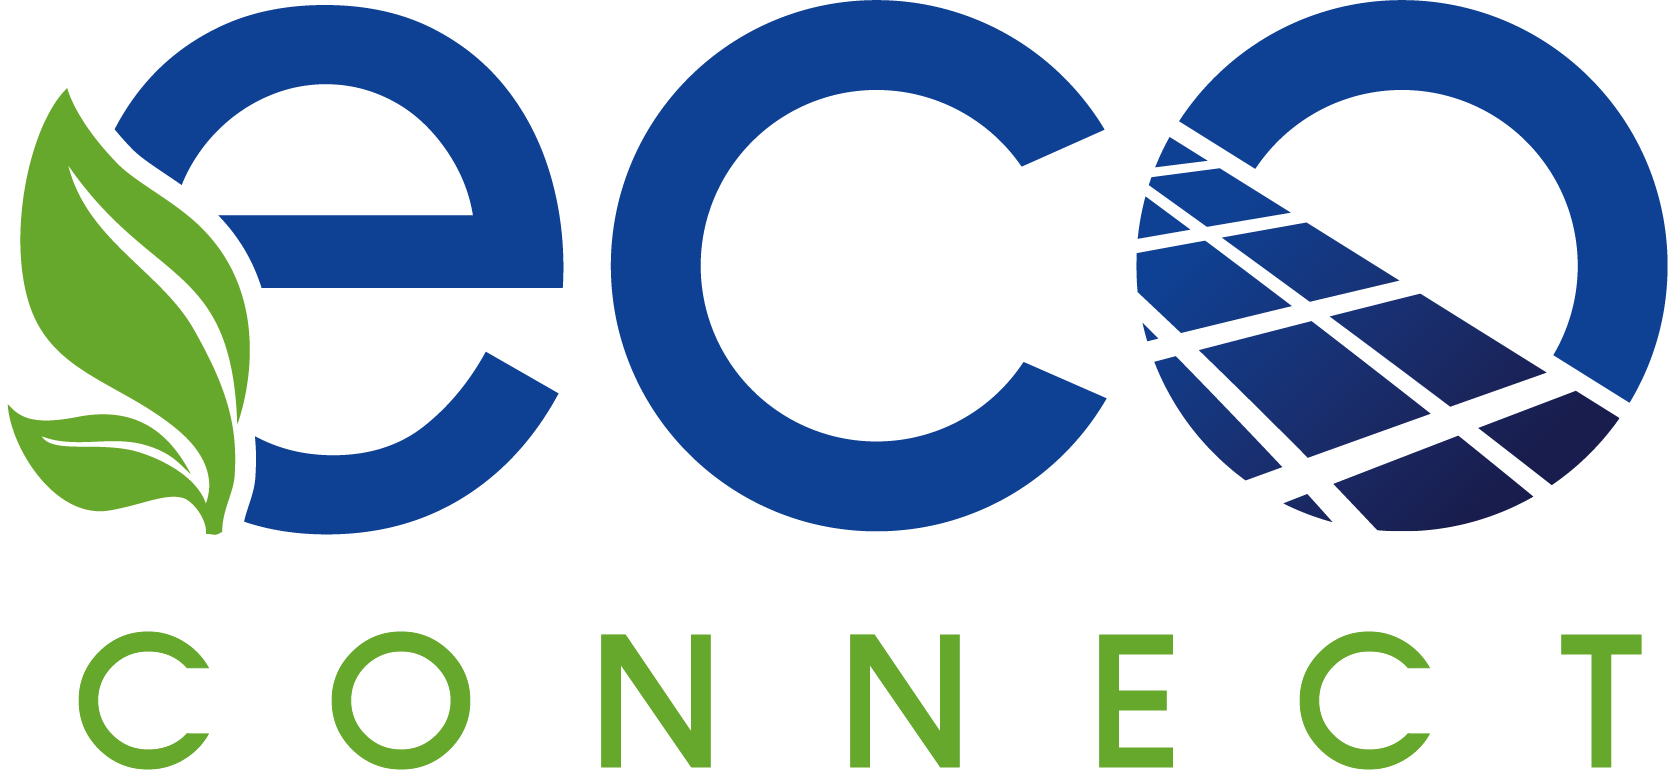 Ecoconnect